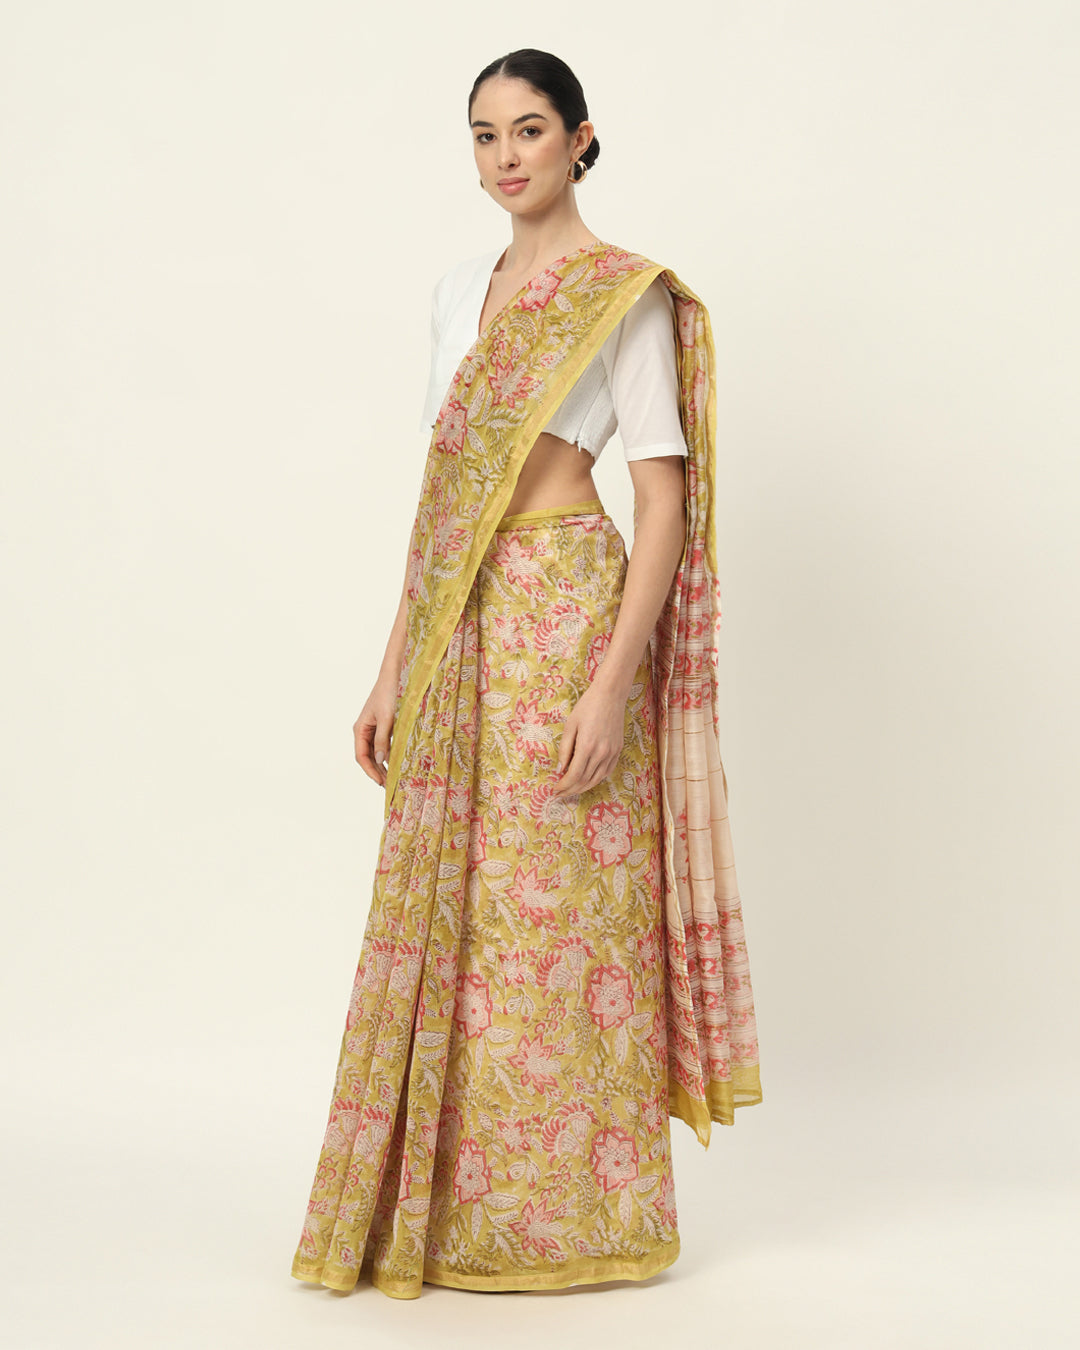 Minty Floral Whispers Chanderi Silk Saree